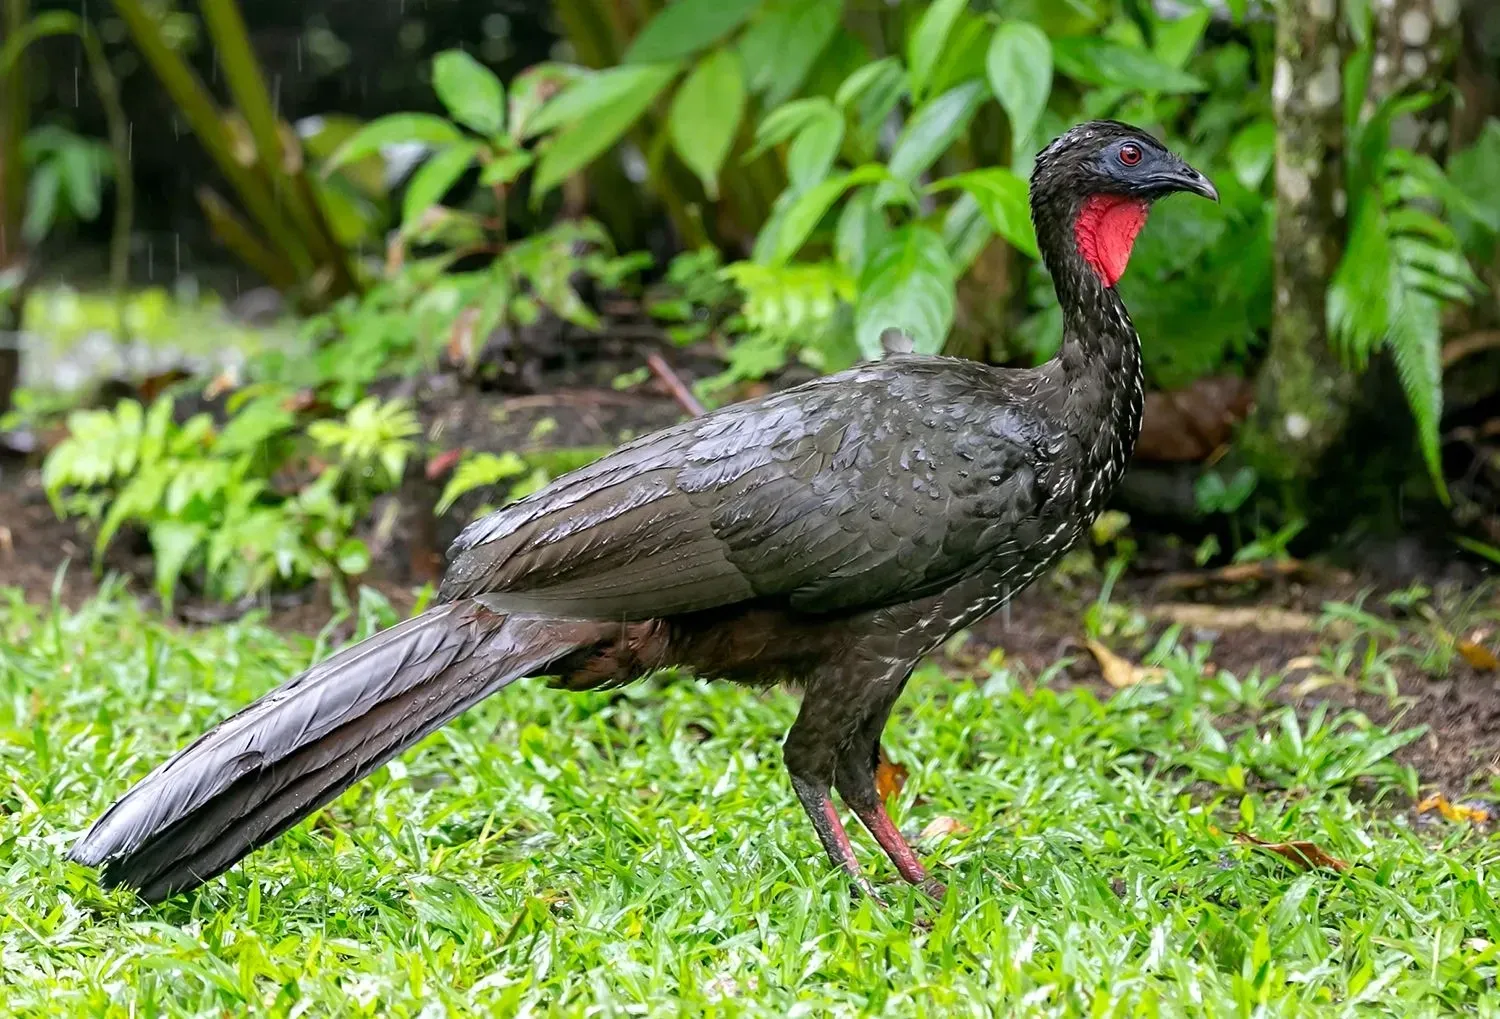 Crested guan facts are fun to read.